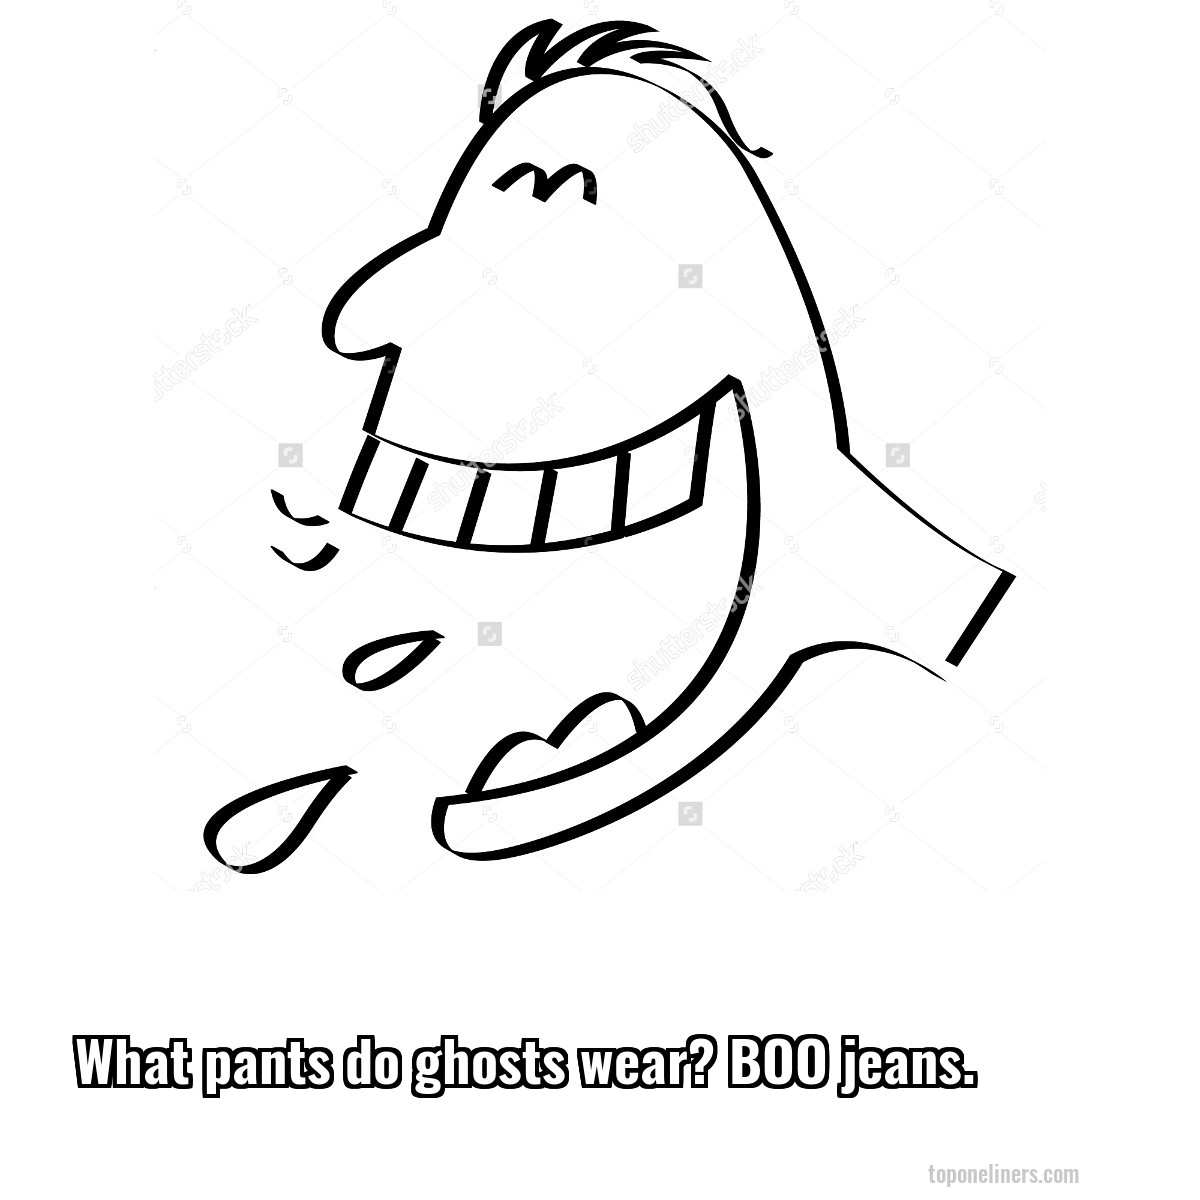 What pants do ghosts wear? BOO jeans.